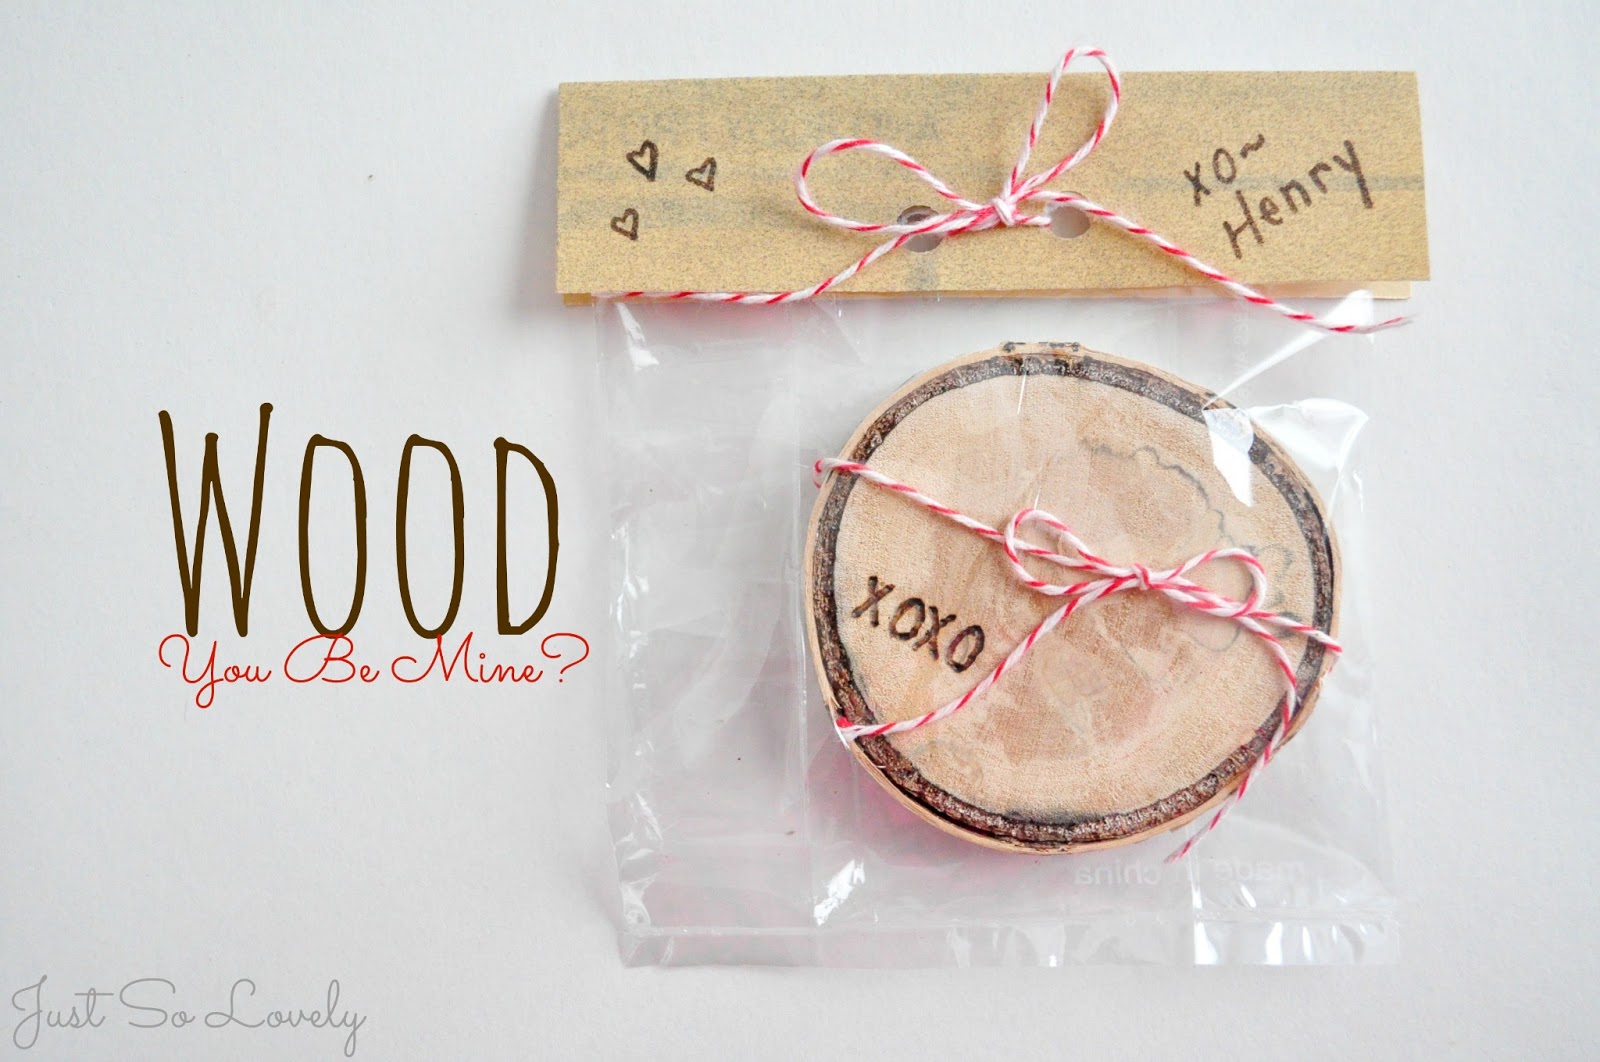 Just So Lovely: Wood You Be Mine? An Easy Wooden Valentine1600 x 1062